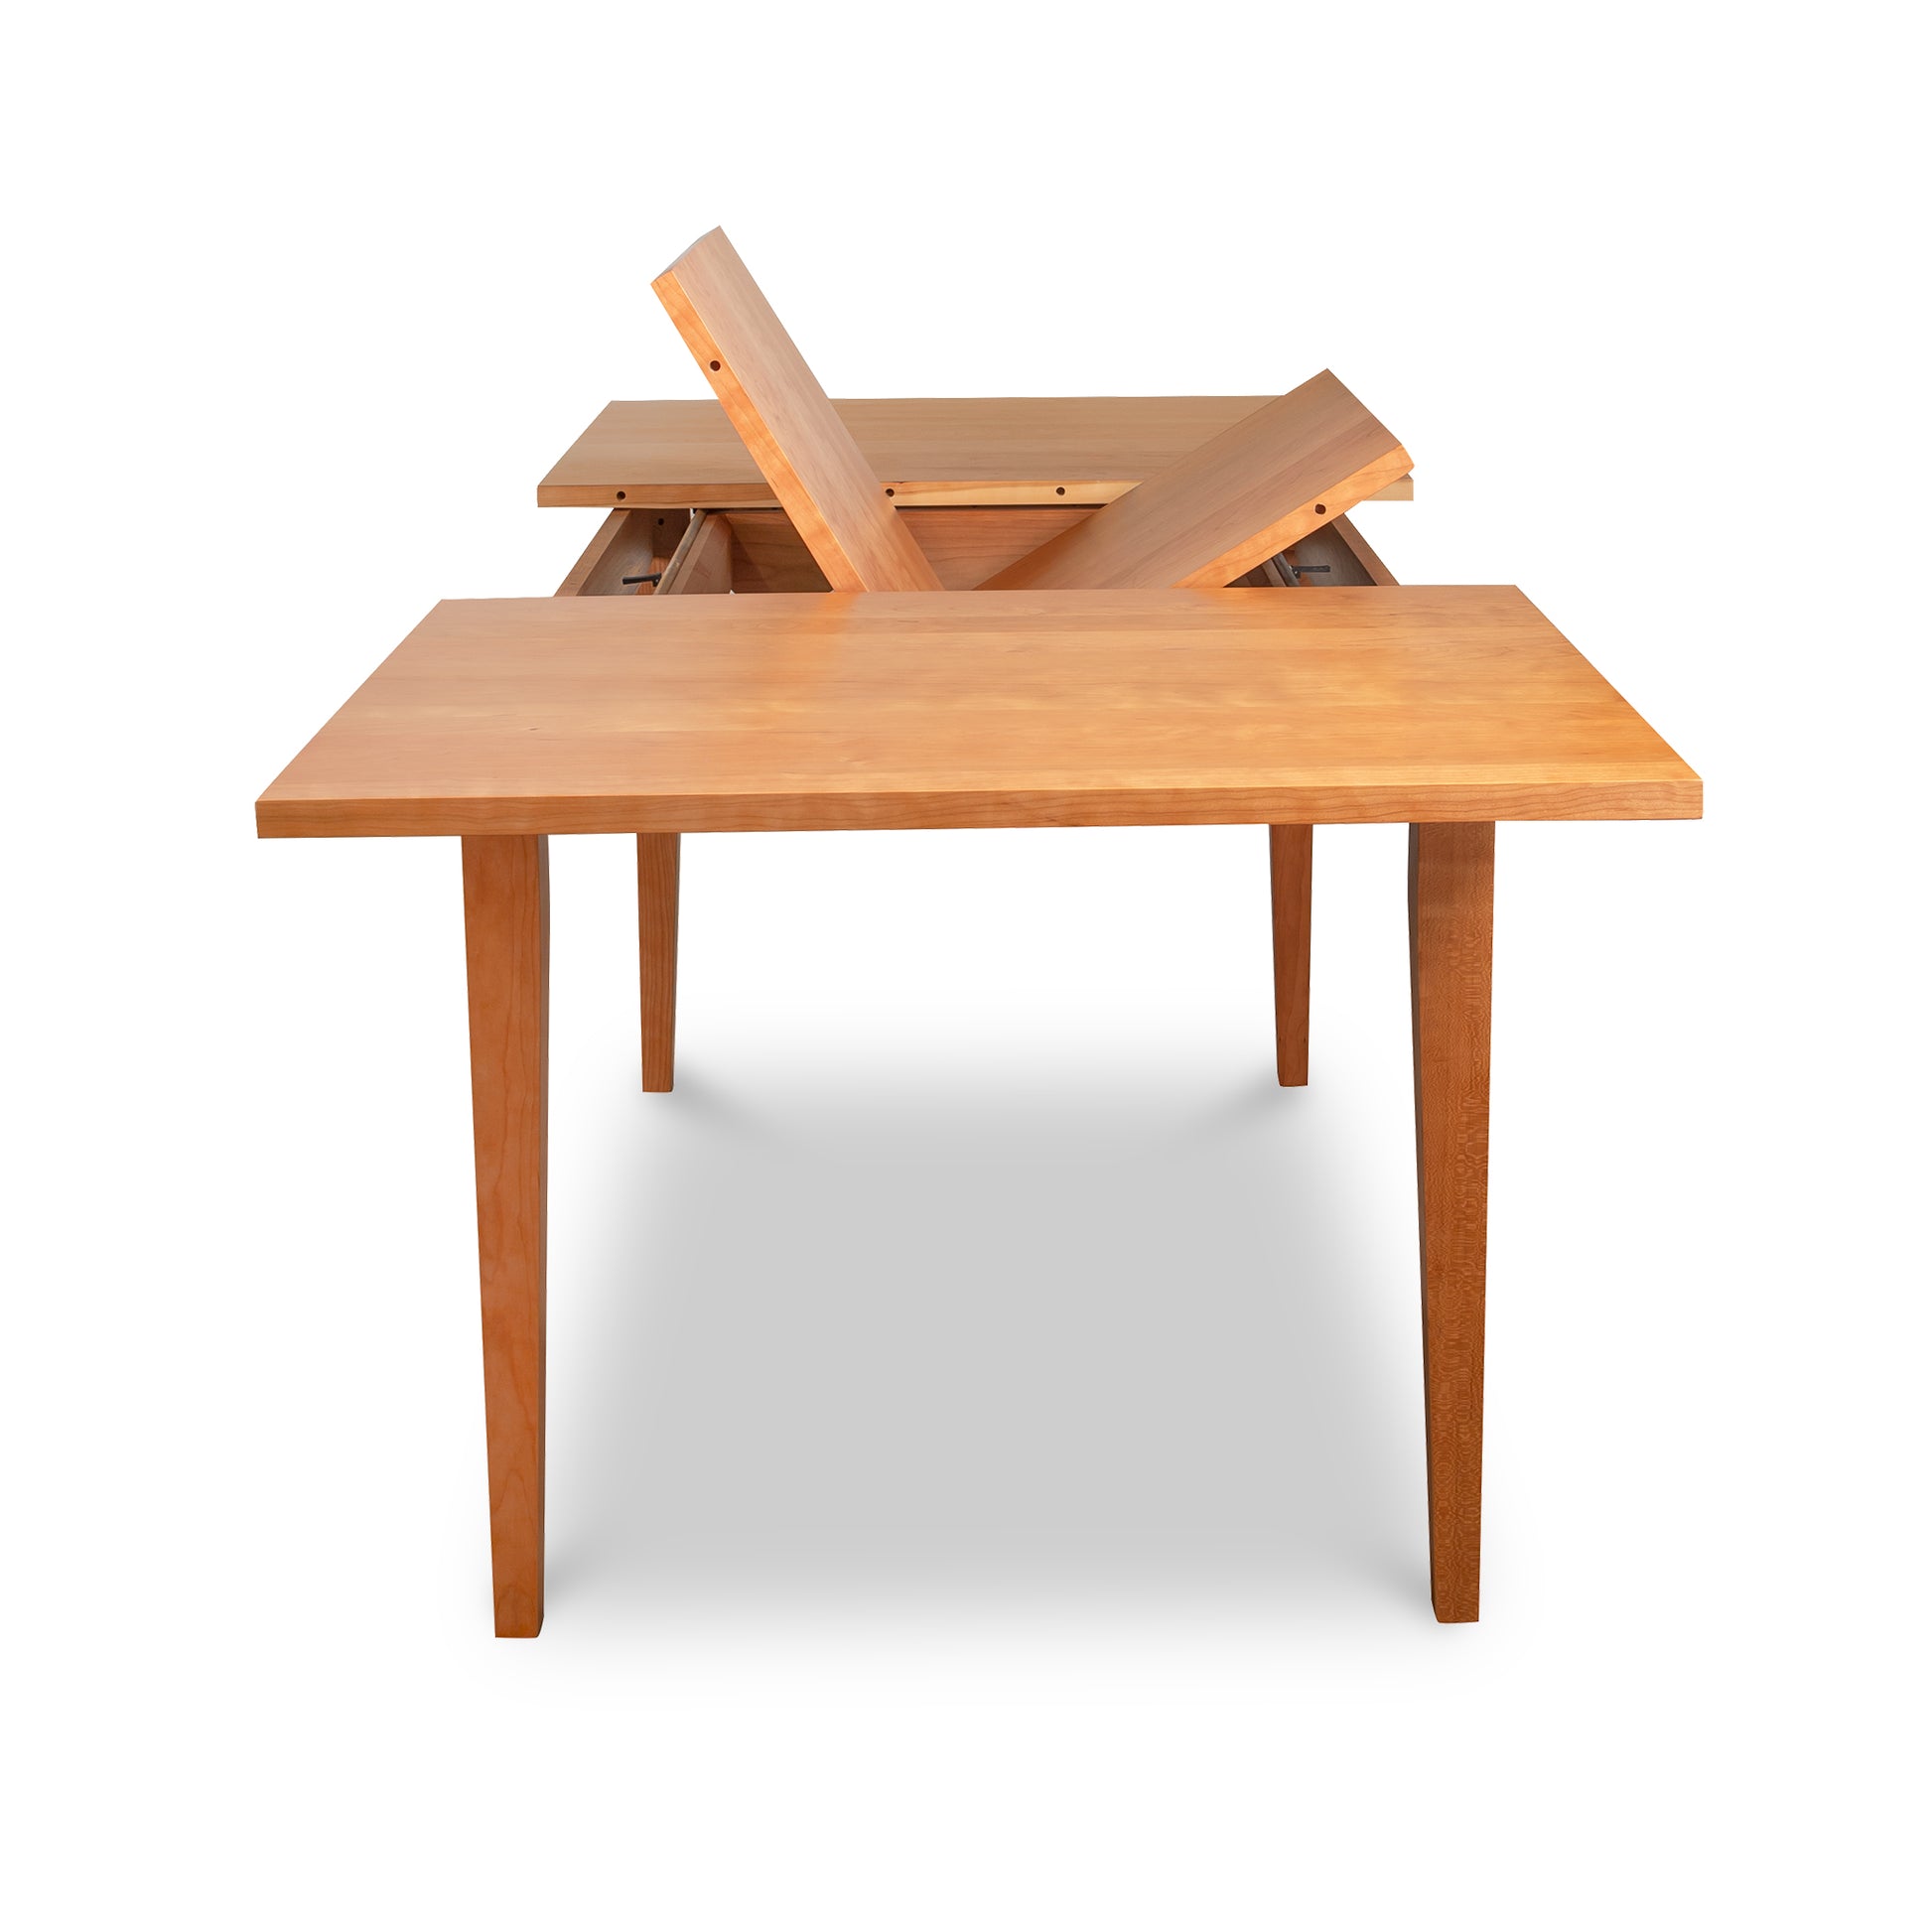 A Classic Shaker Butterfly Extension Table by Lyndon Furniture with a folding top.